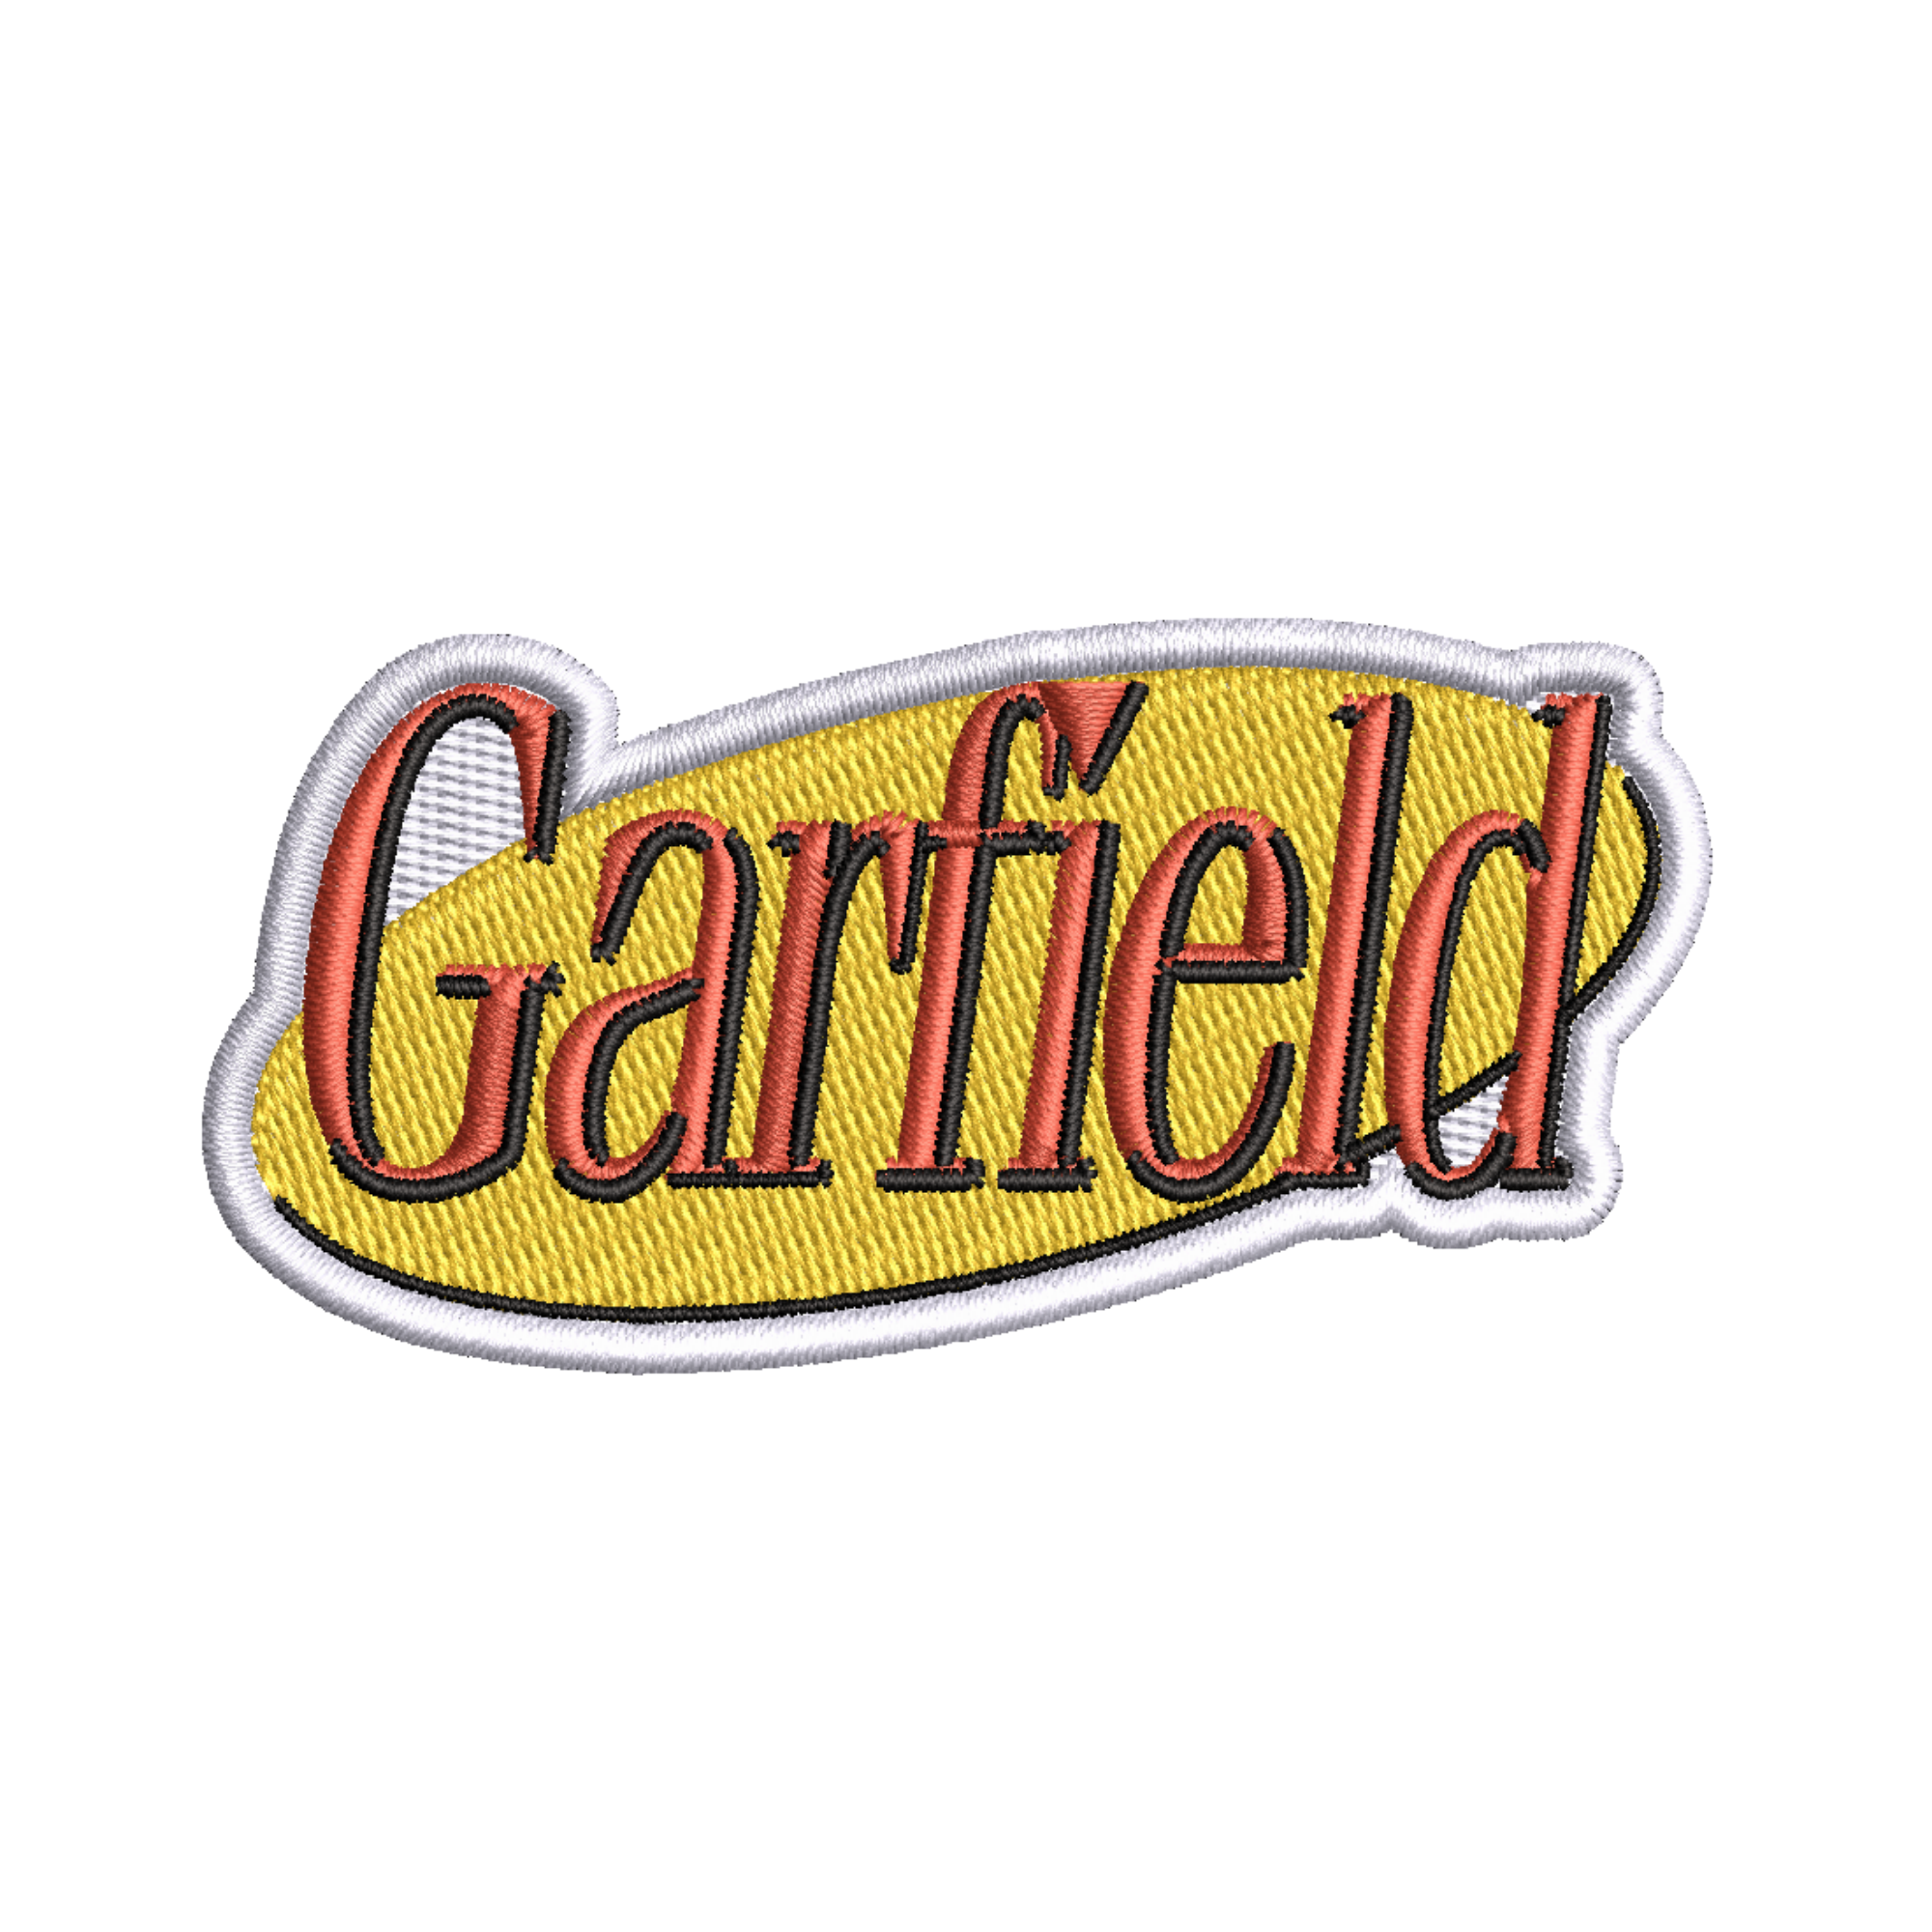 Garfield Seinfeld Crossover Episode Embroidered Iron-on Patch